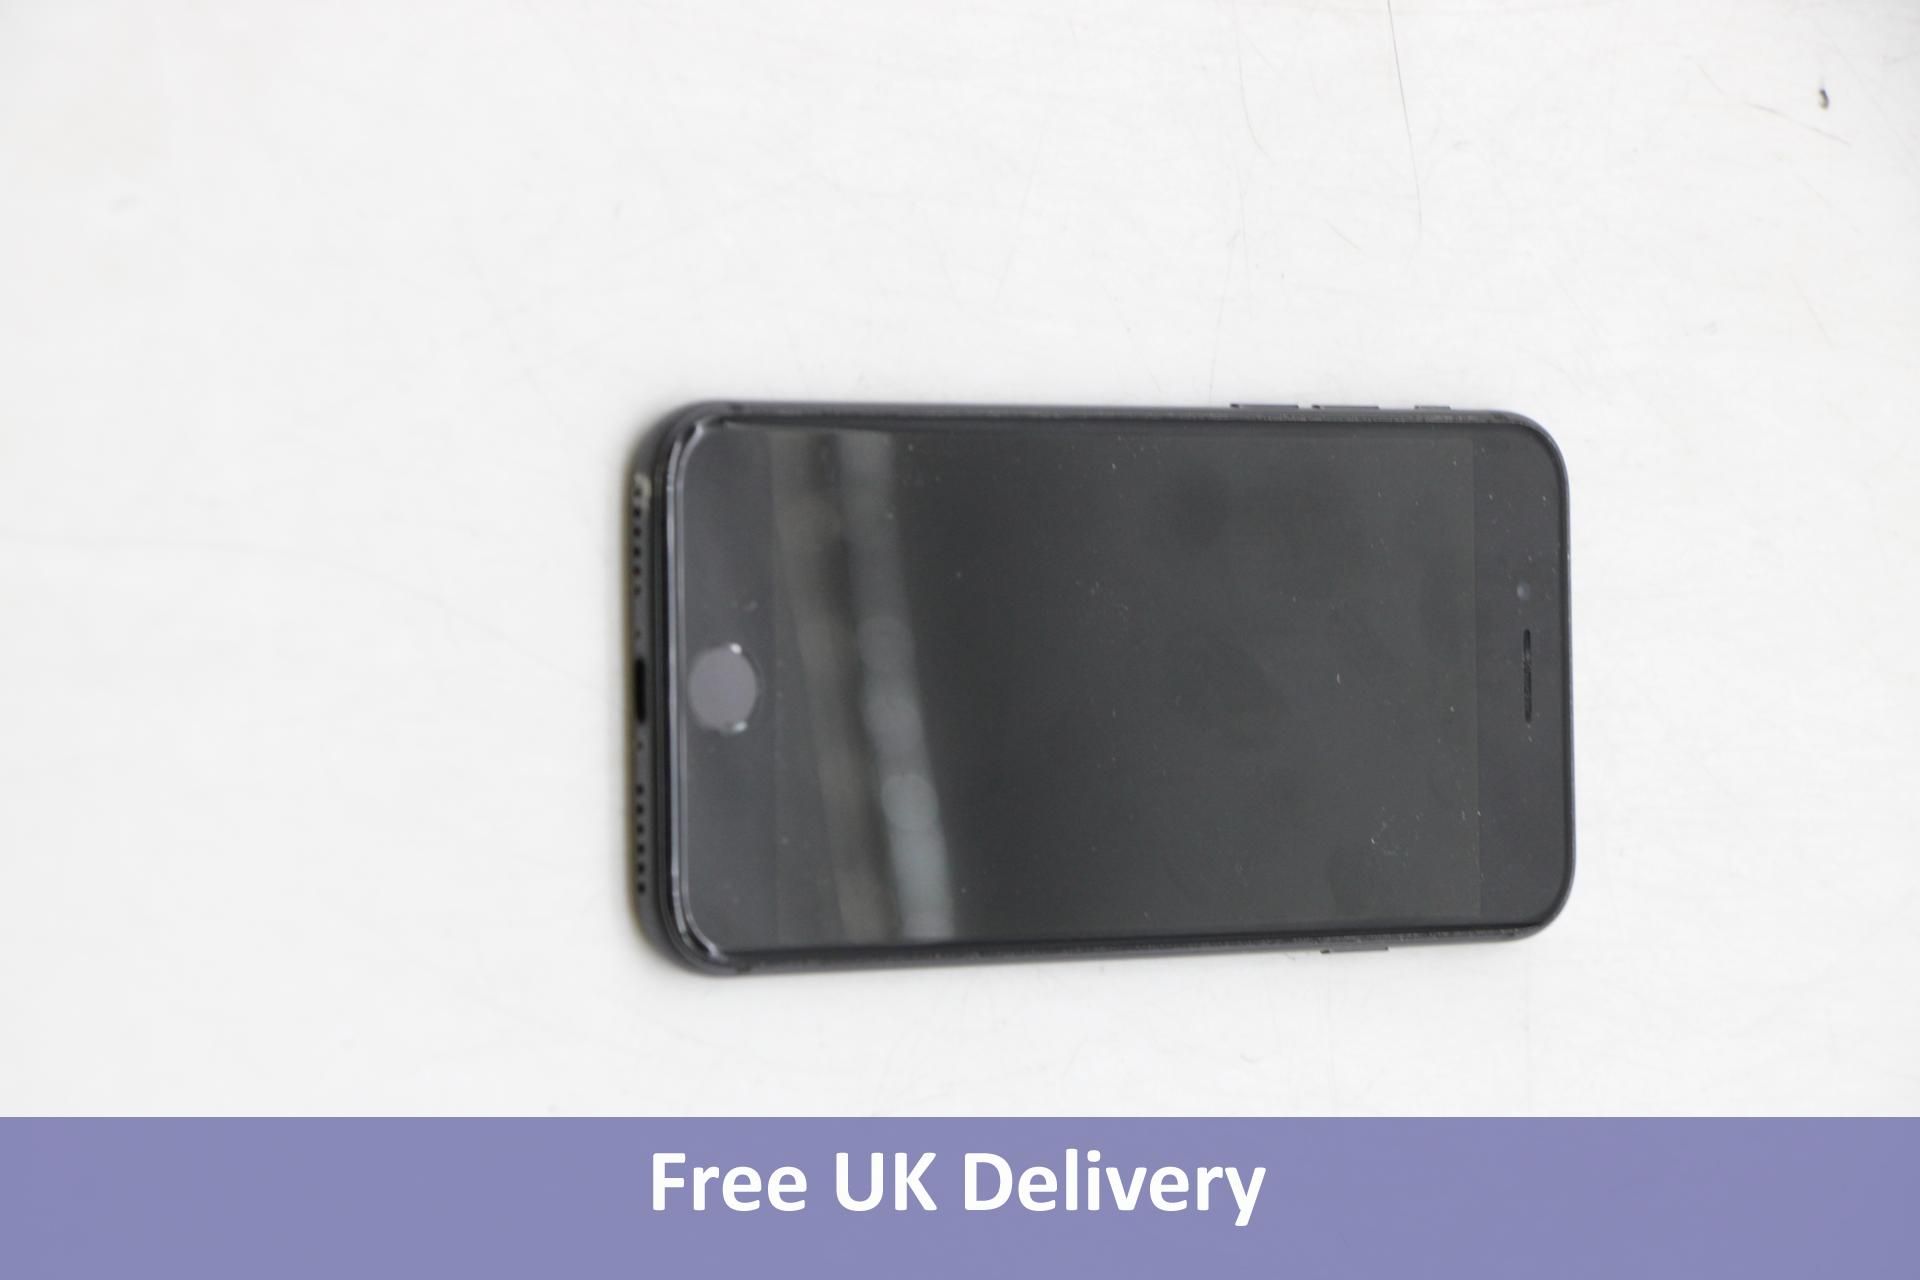 Apple iPhone 8, 64GB, Space Grey. Used, no box or accessories. Checkmend clear, Ref. CM19872307-24F3